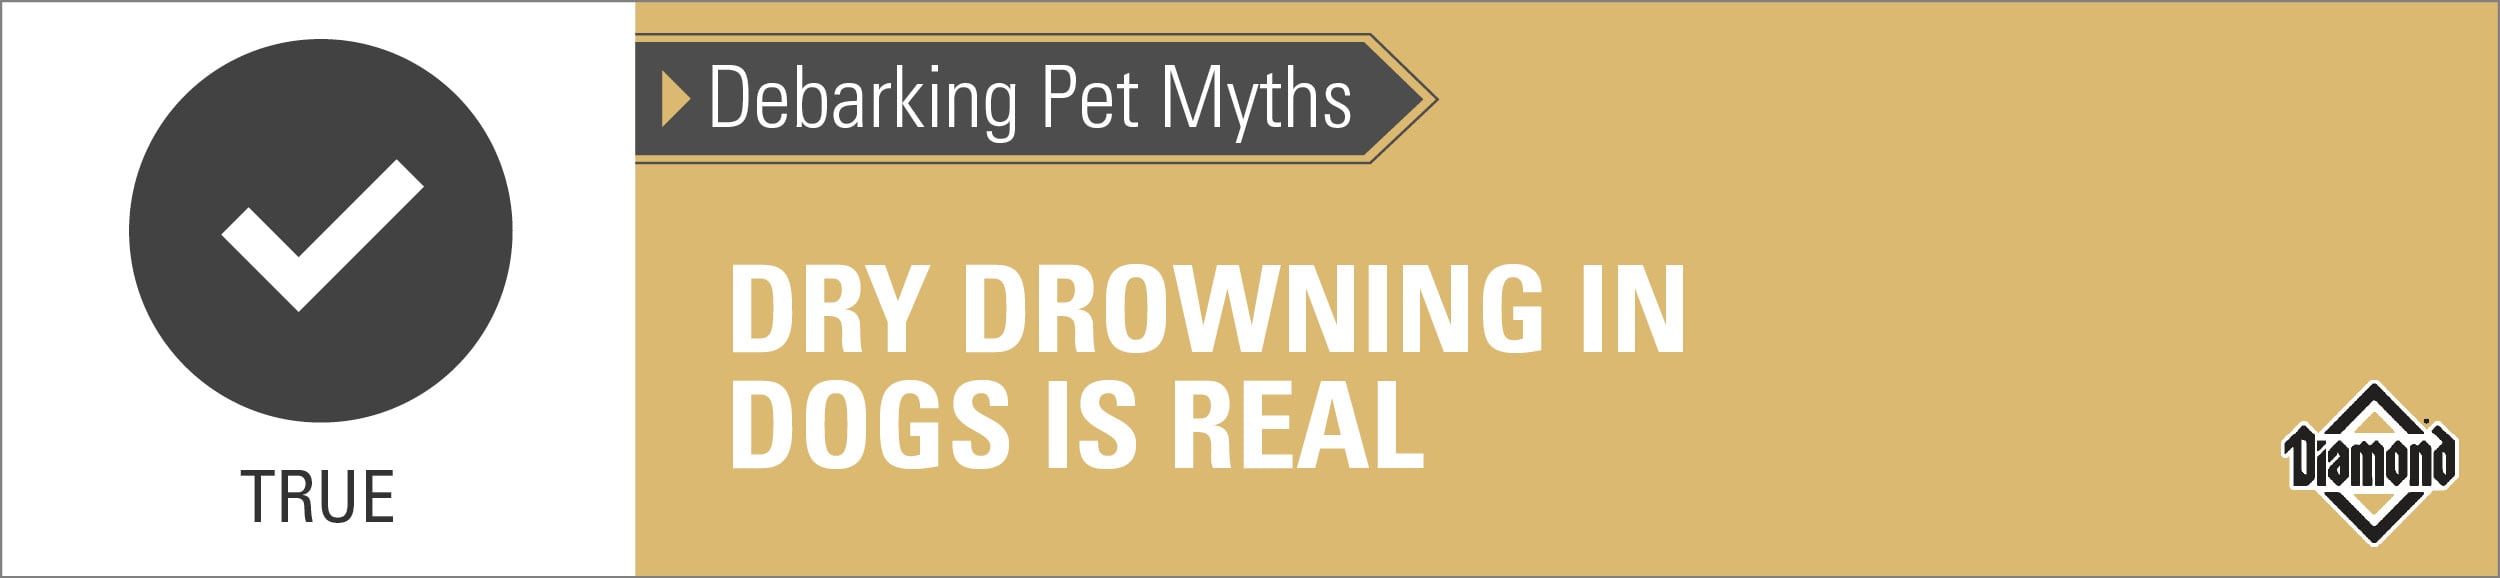 Graphic Saying Dry Drowning In Dogs is Real | Diamond Pet Foods